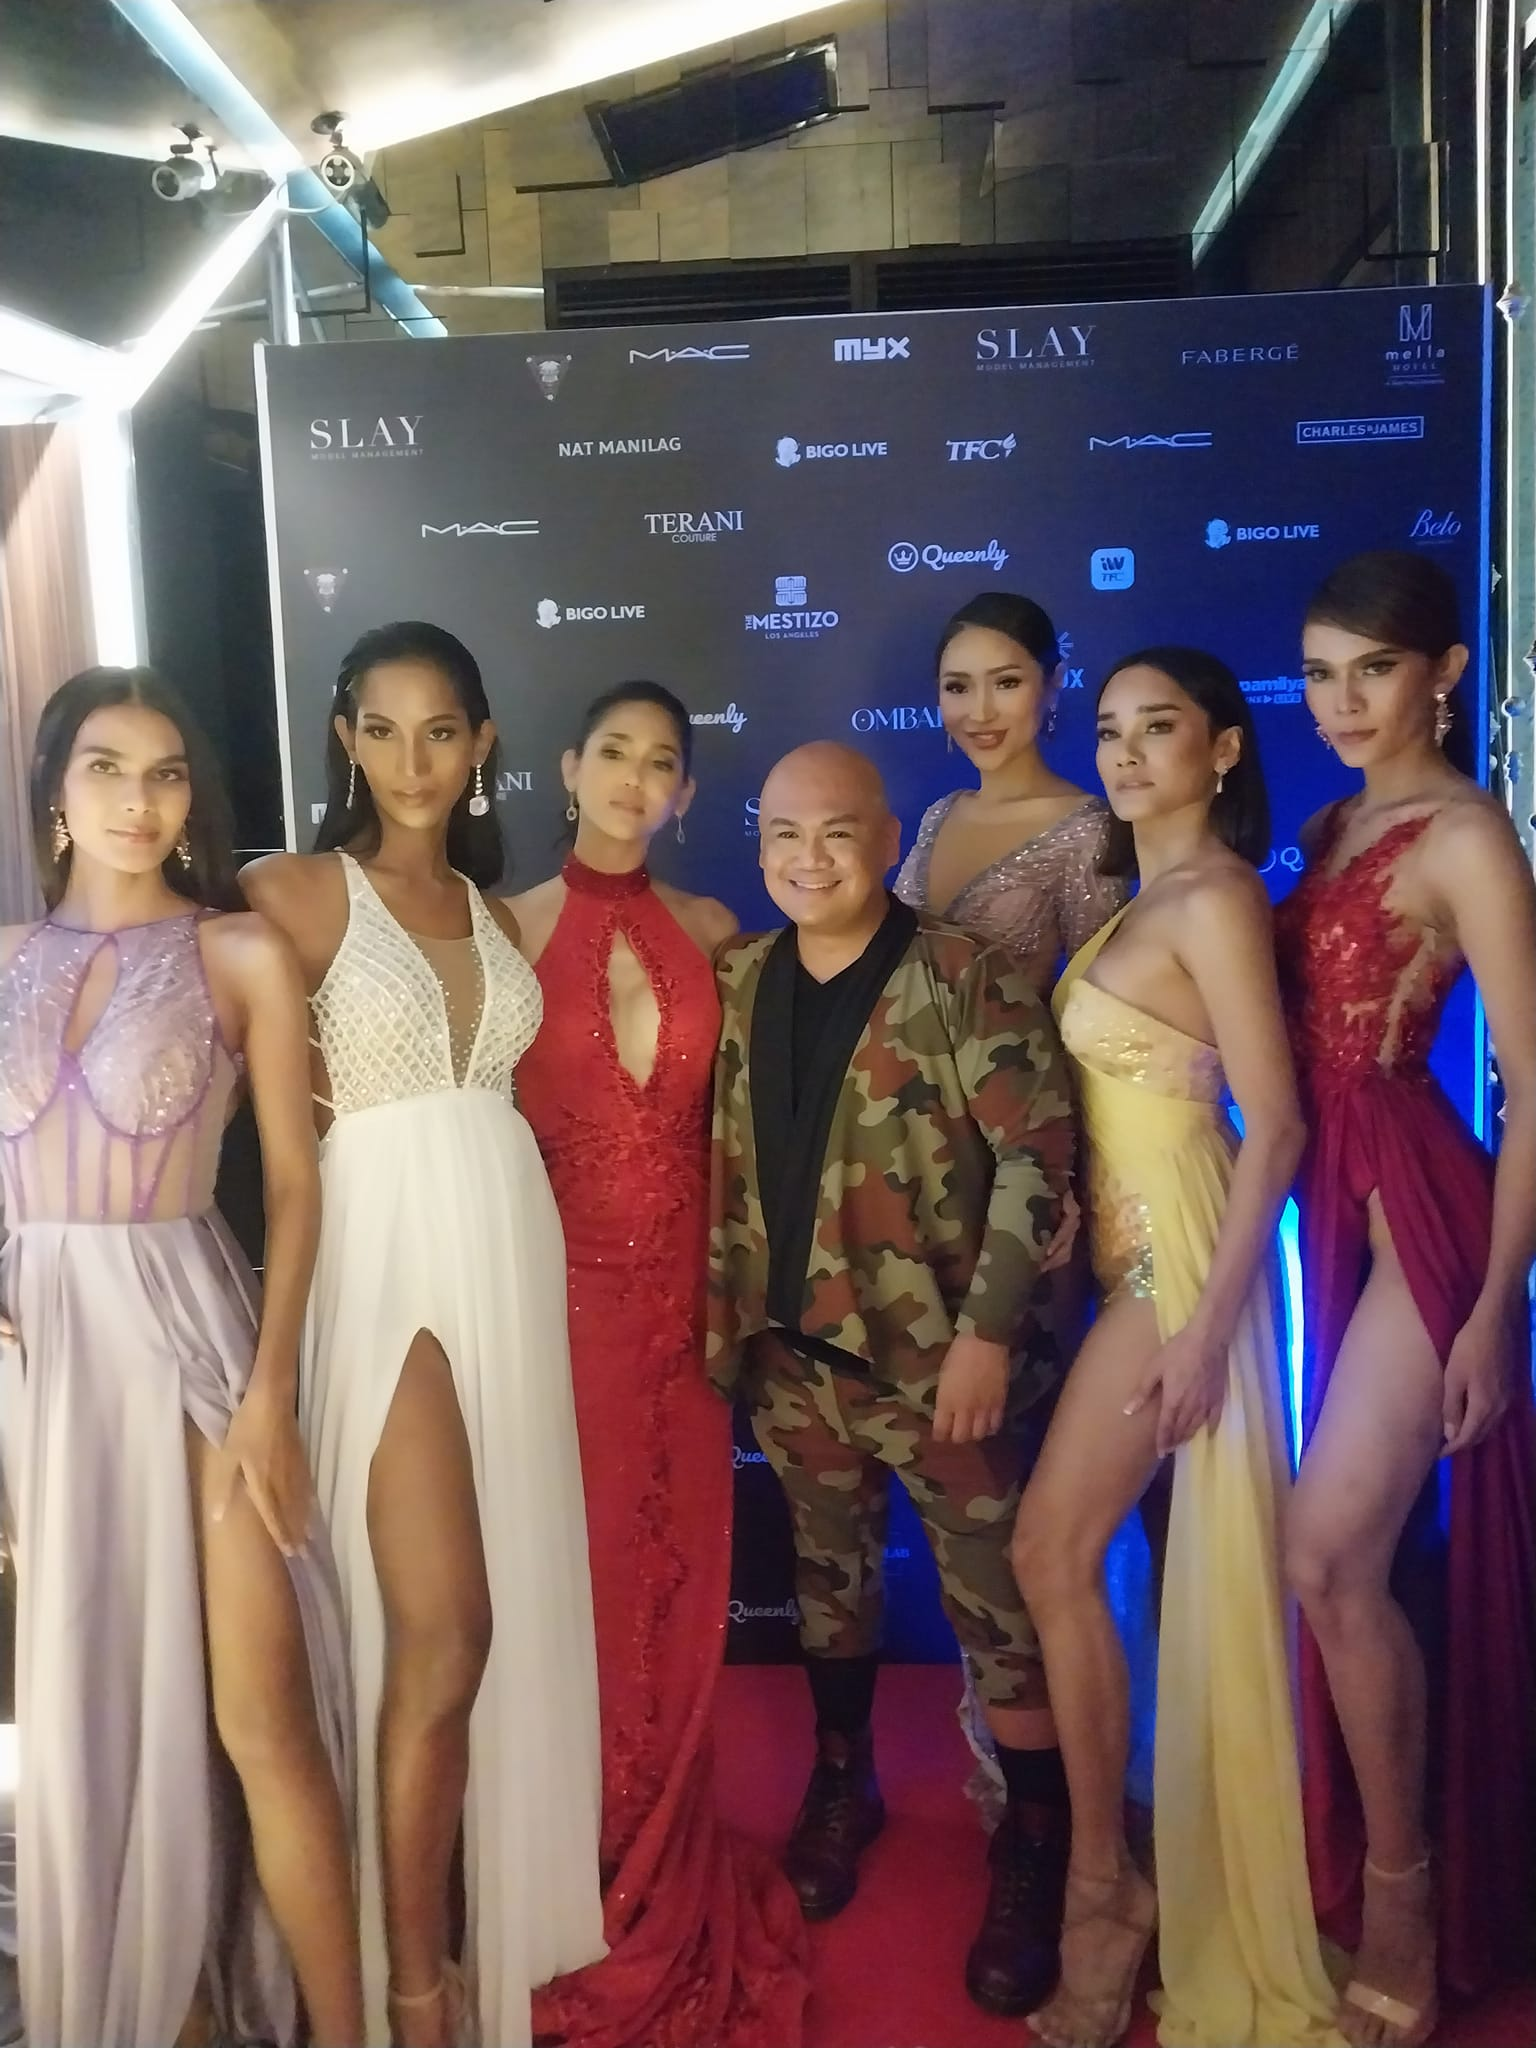 Model search for transgenders is very timely, says Cece Asuncion